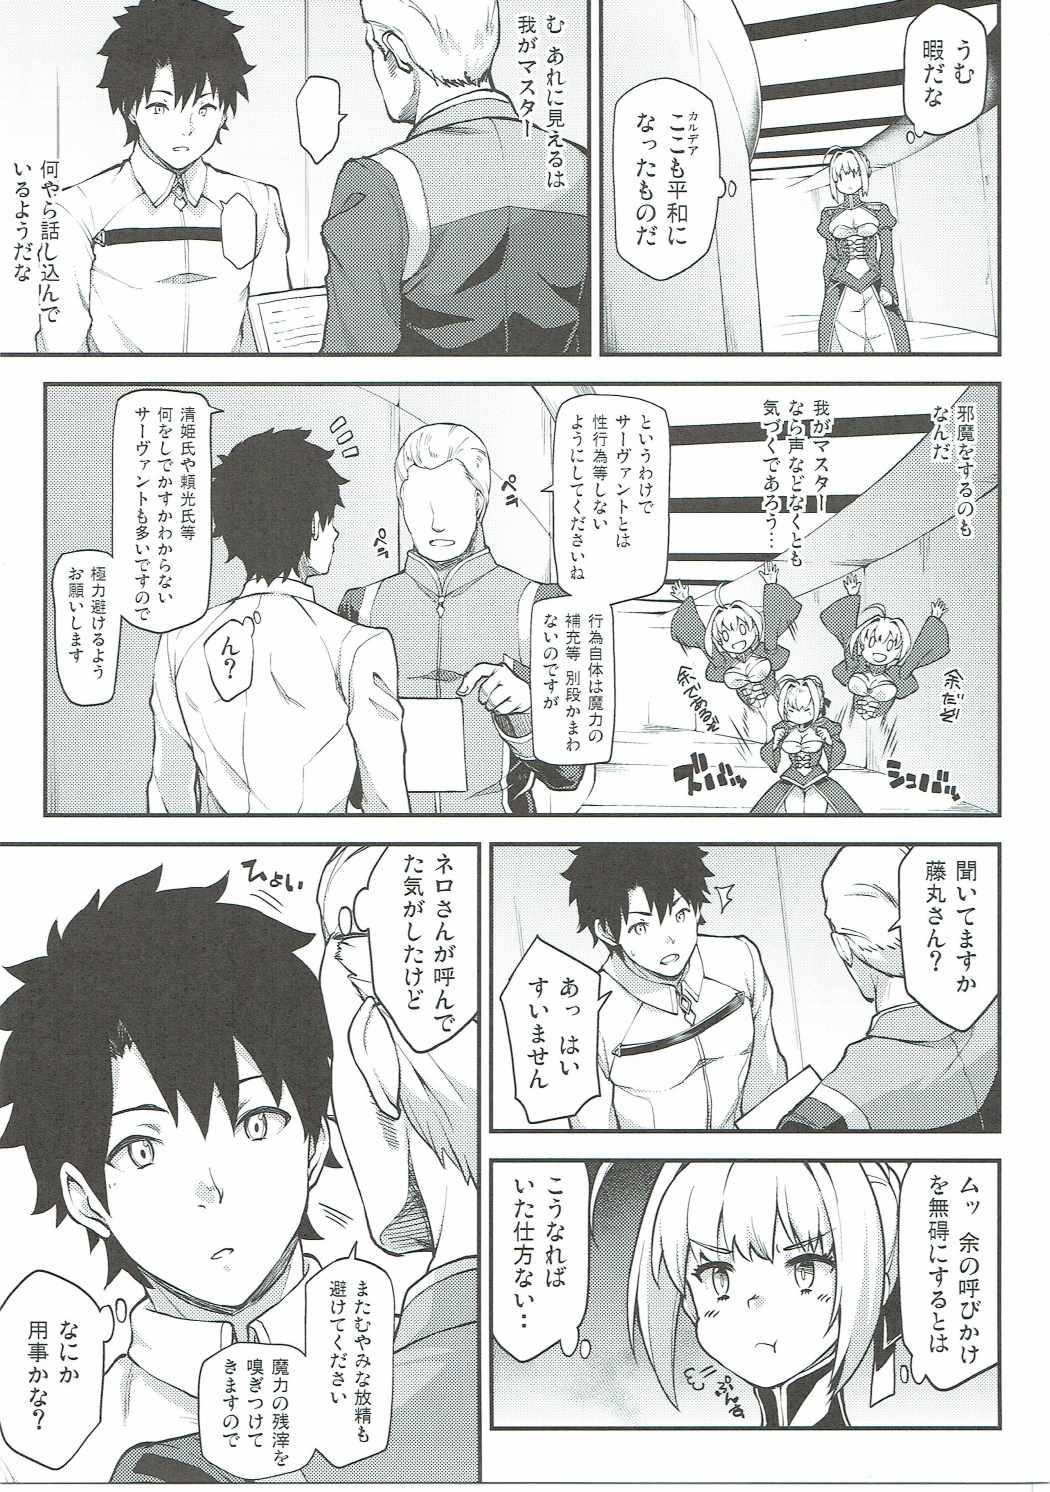 Gorgeous Dosukebe Saber Wars - Fate grand order Gay Uncut - Page 10